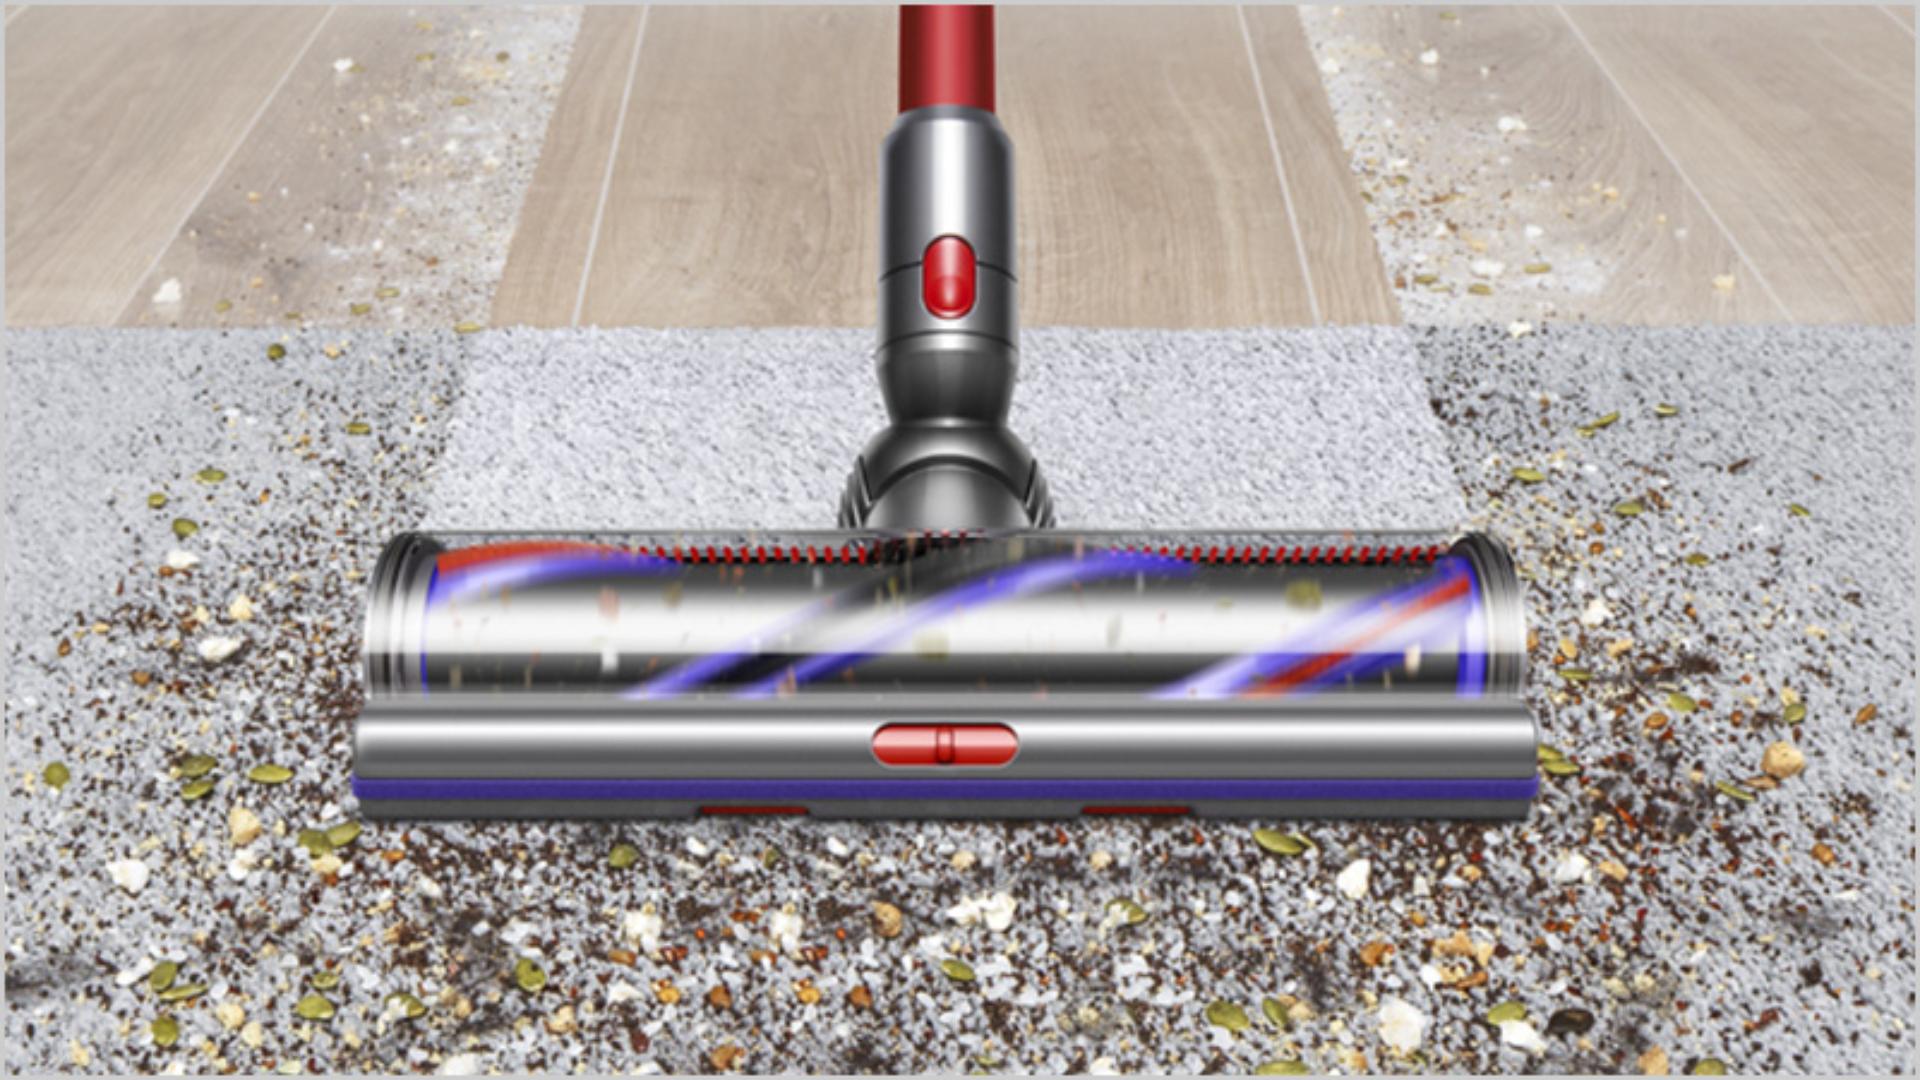 Motorbar XL cleaner head moving from hard floor to carpet